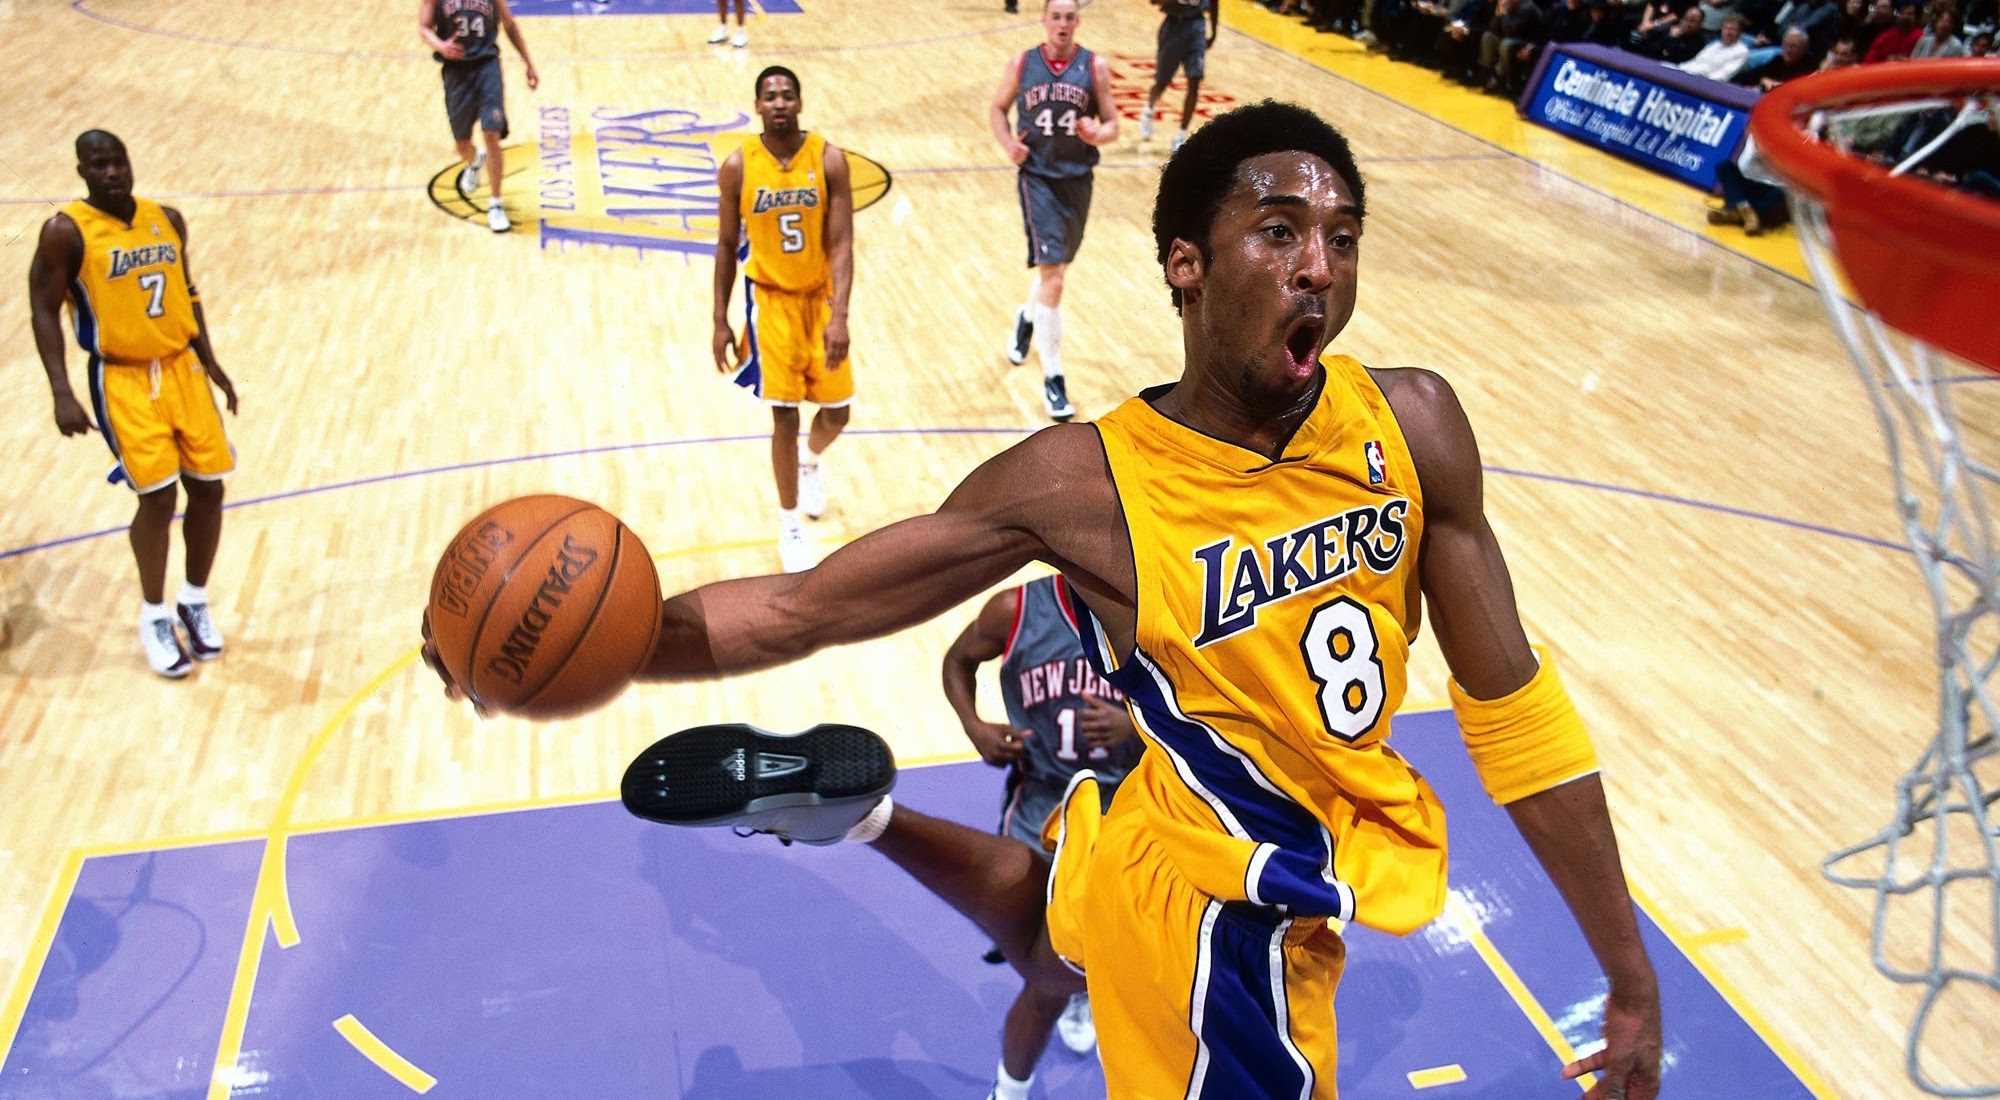 Kobe Bryant Top 100 Dunks of All-Time